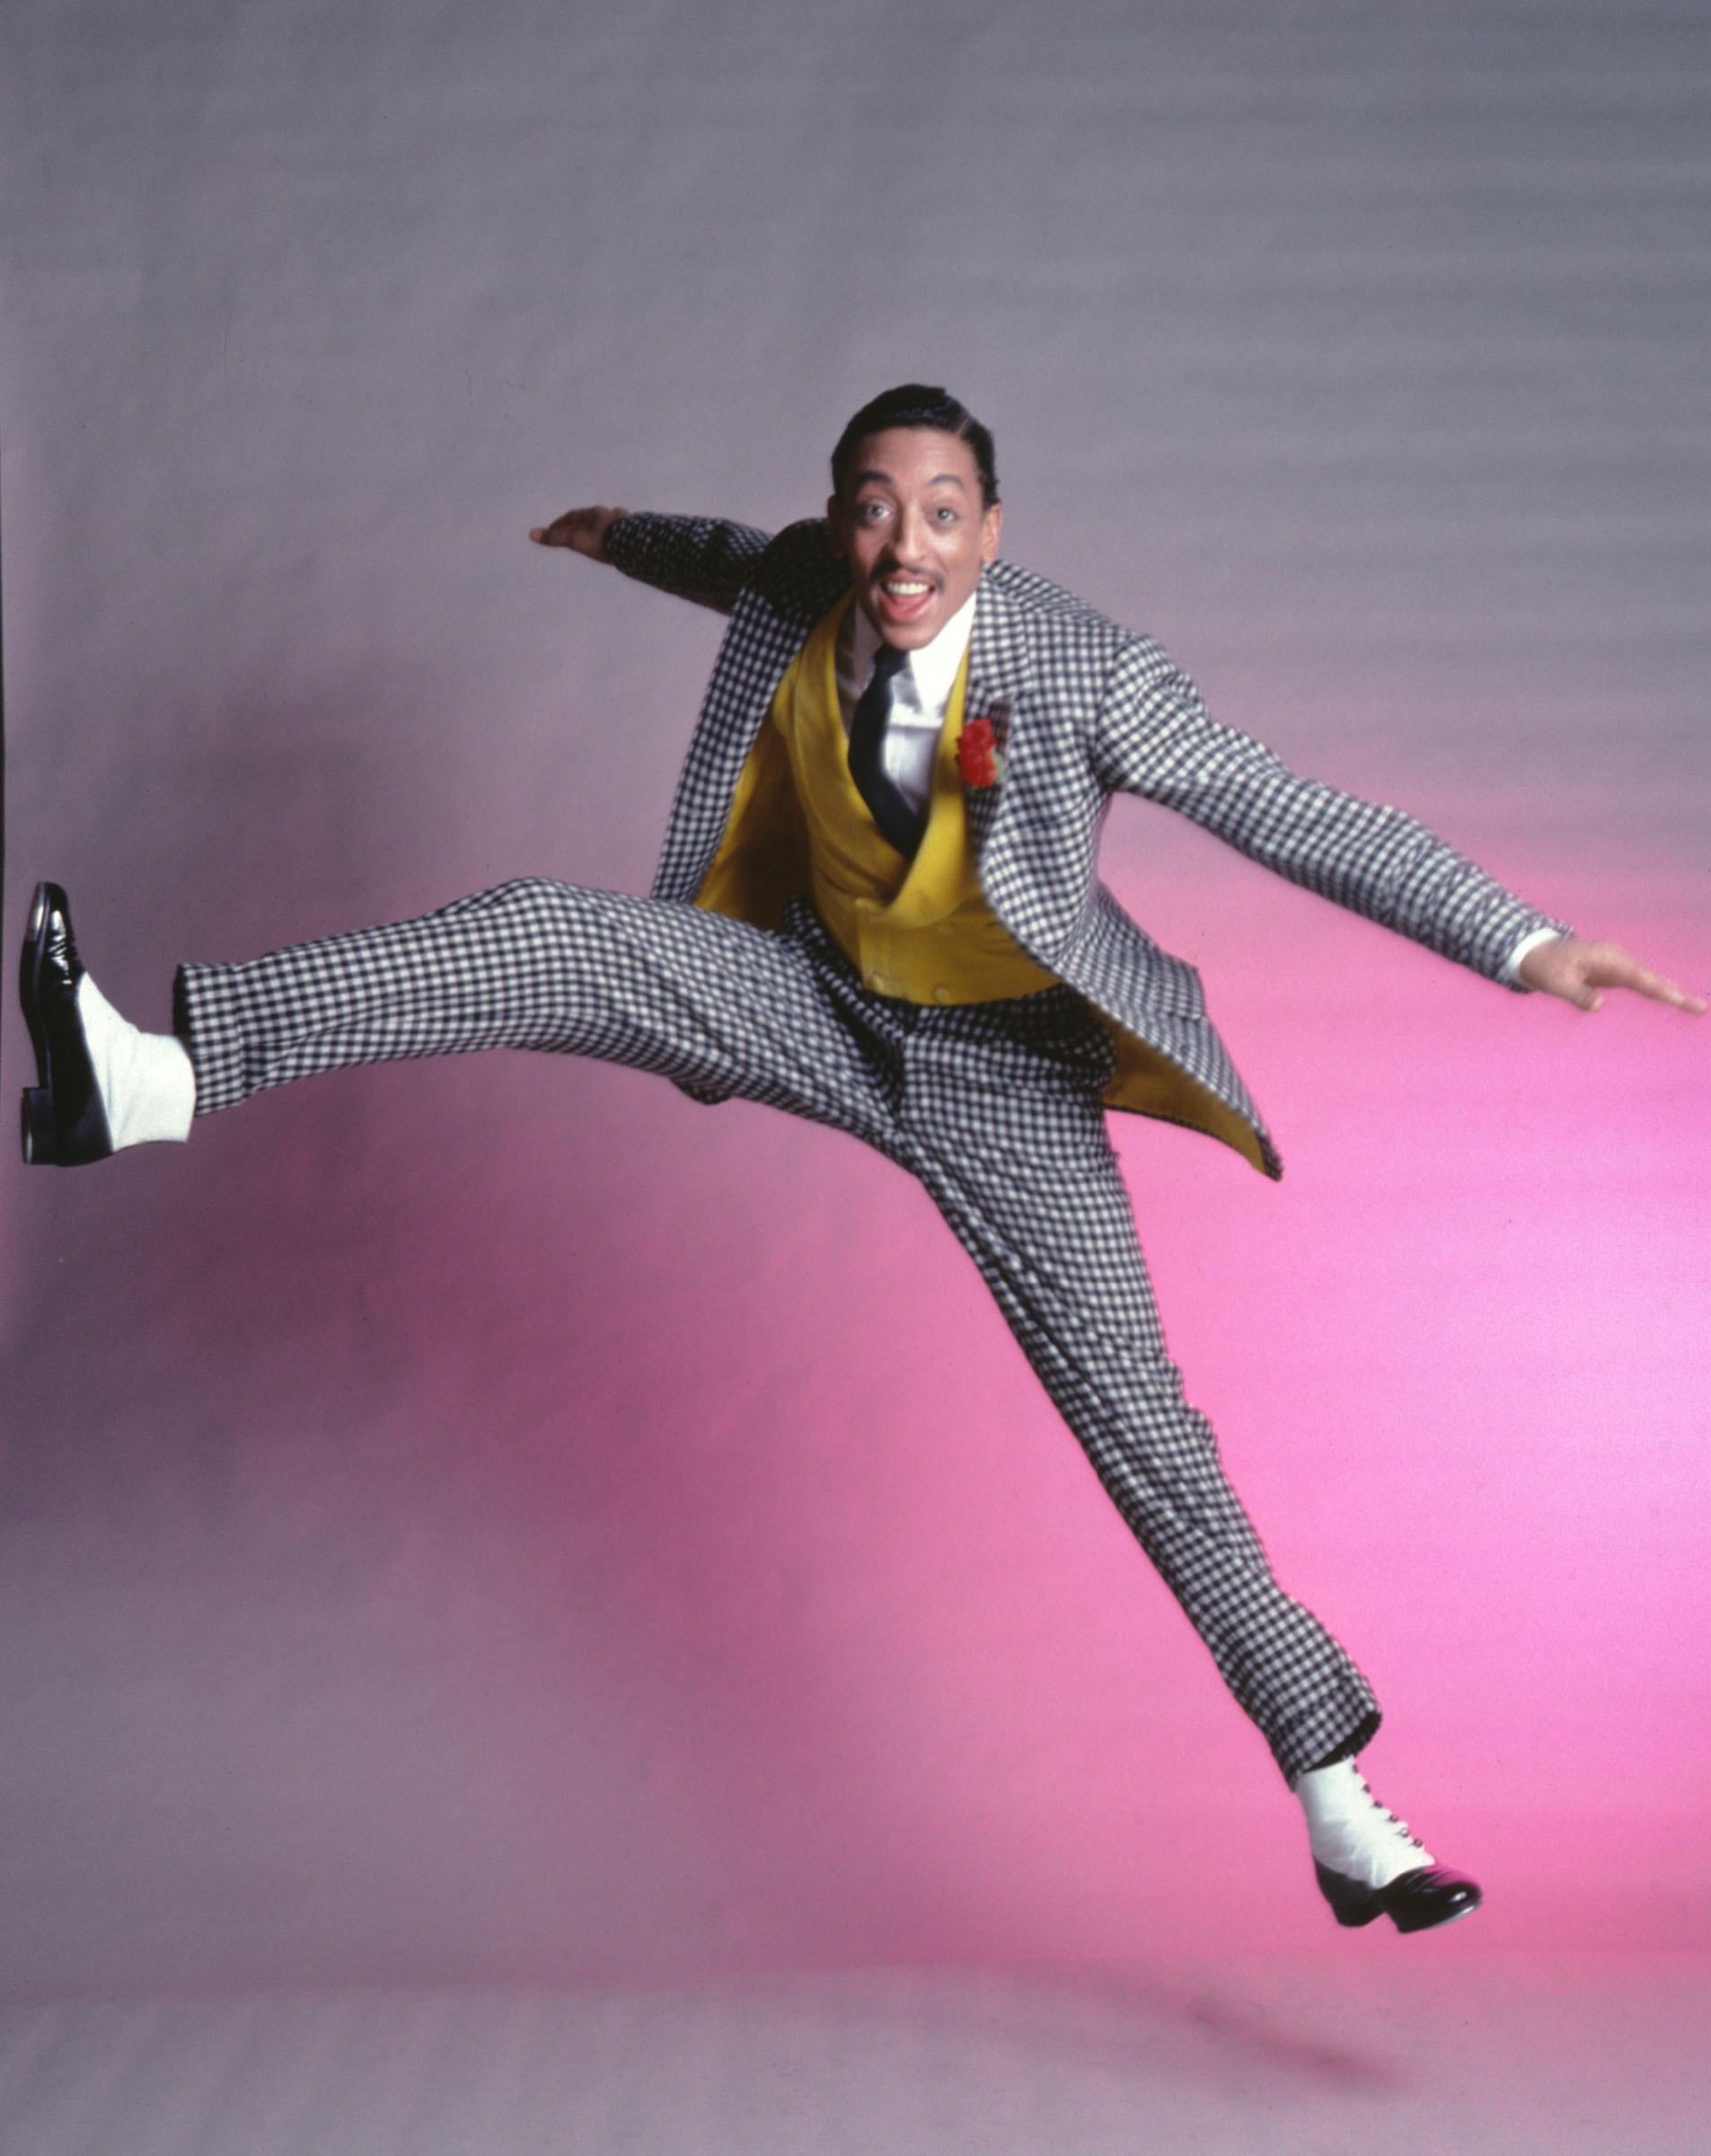 Jack Mitchell Color Photograph - Gregory Hines in 'Sophisticated Ladies', Color 17 x 22" Exhibition Photograph